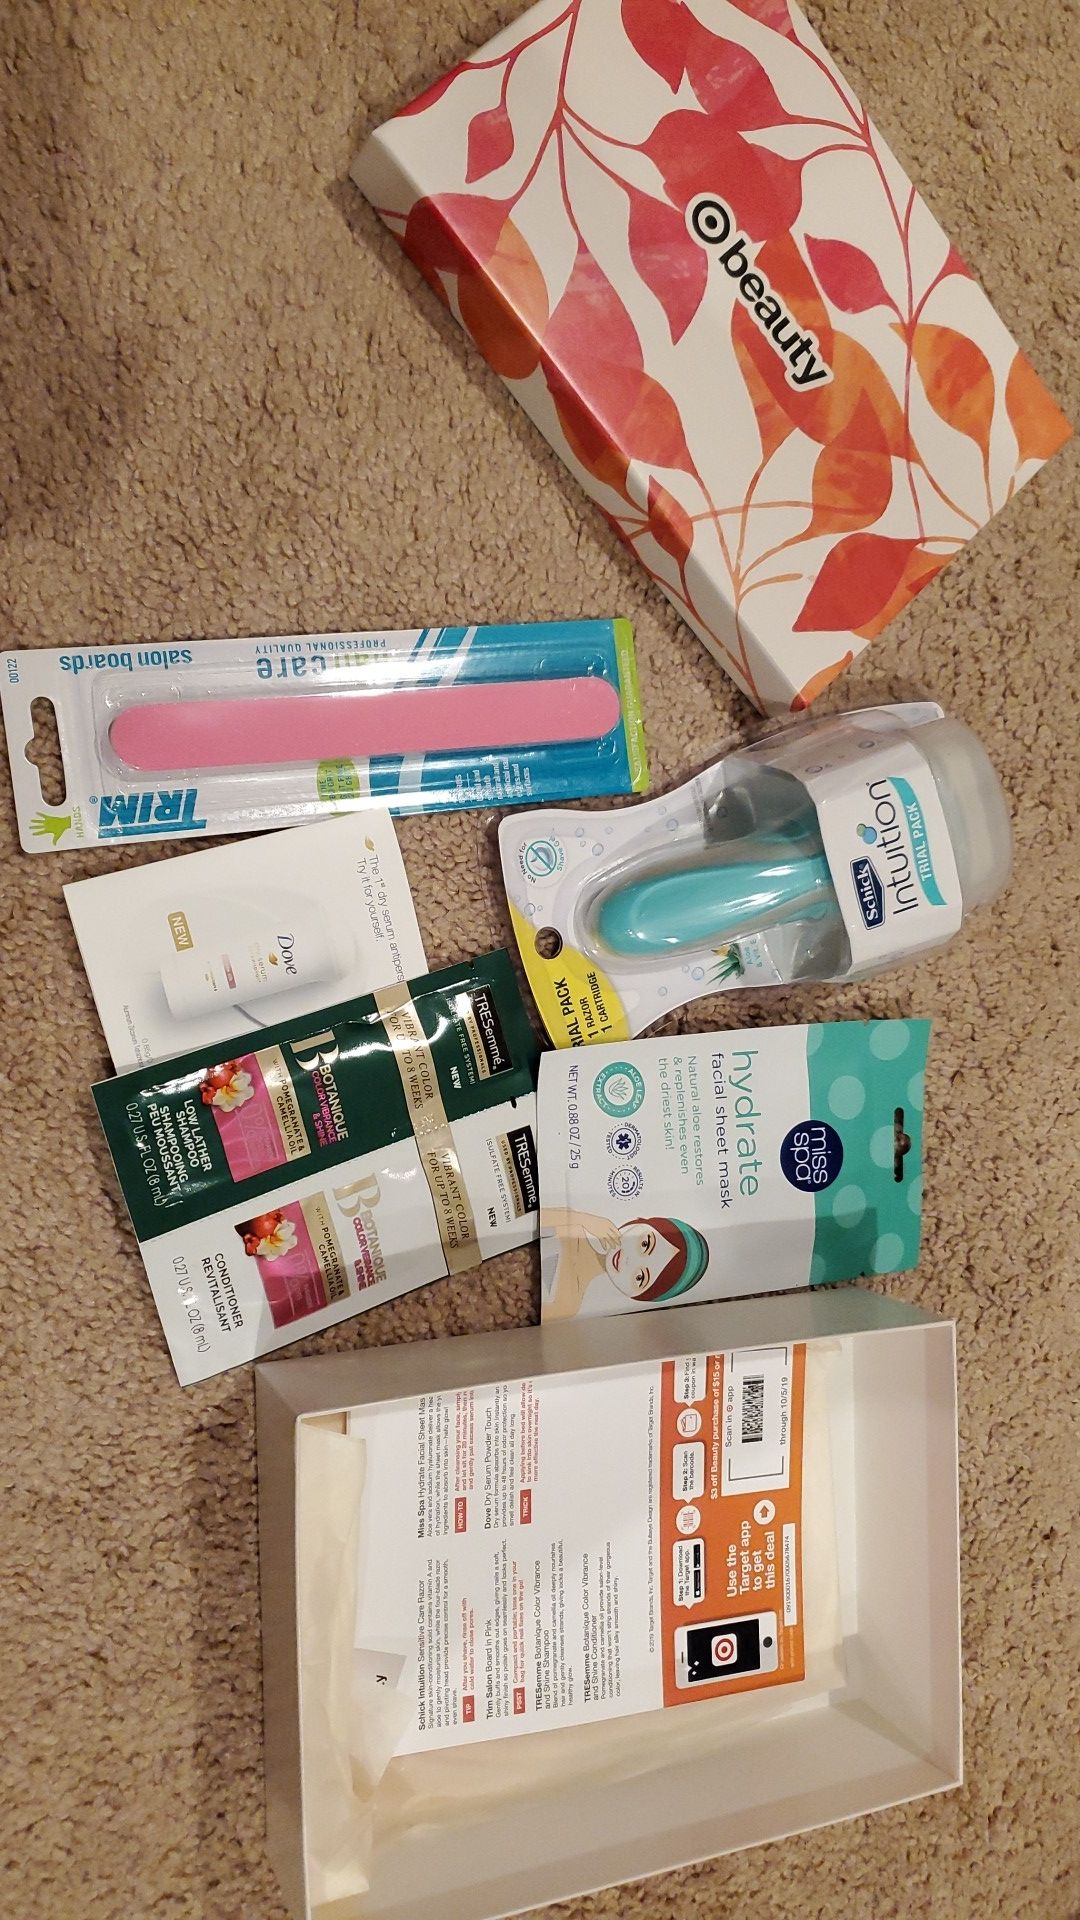 New in wrap! Target Beauty box